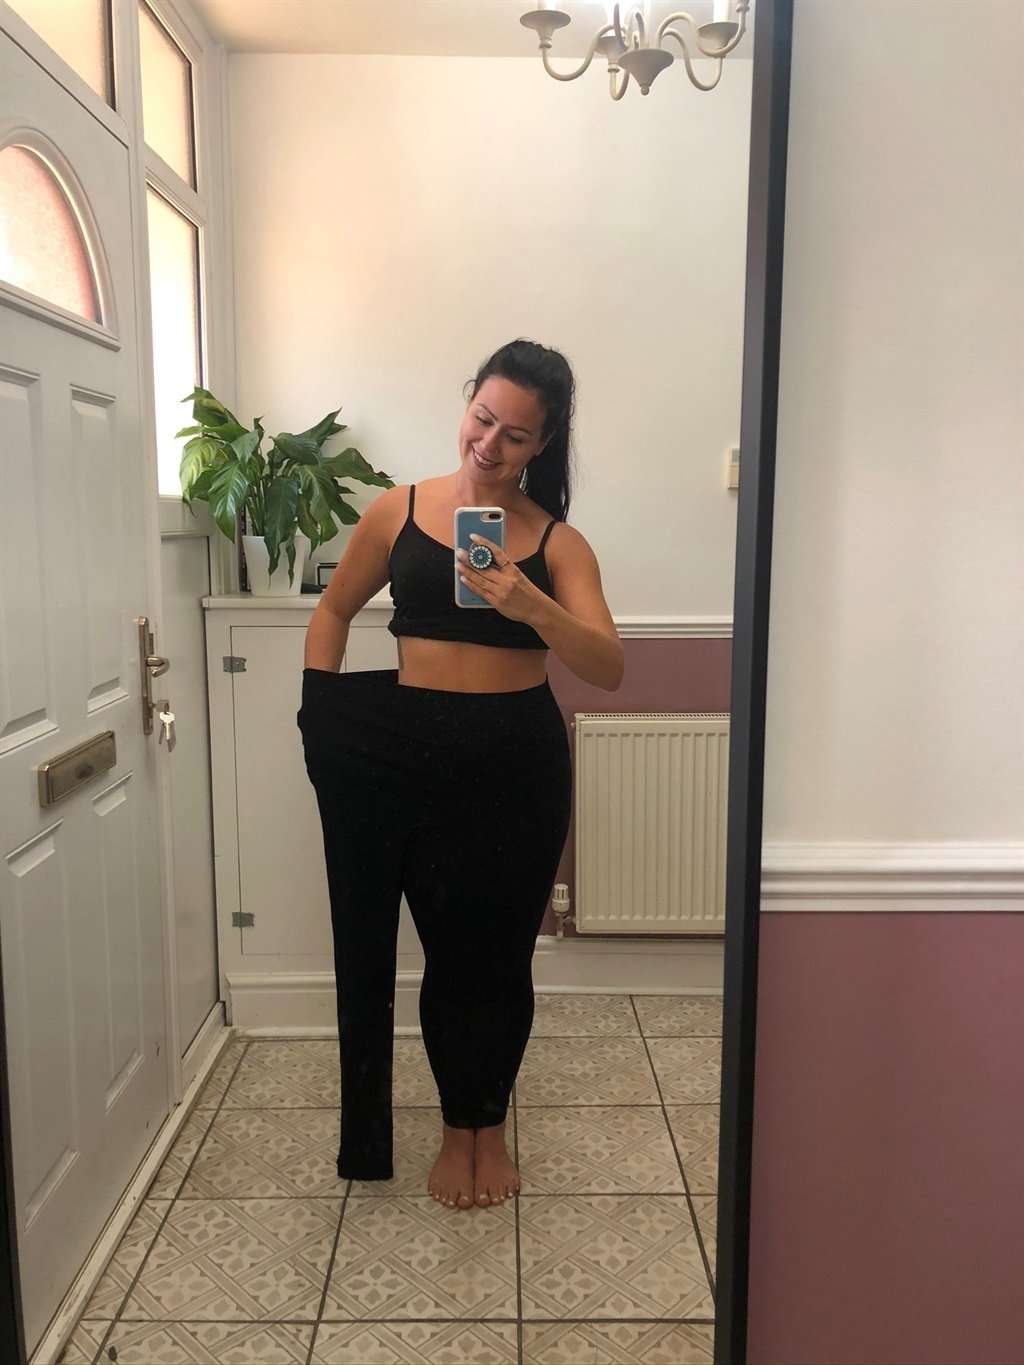 NOTTINGHAM, UK: Amy is proud of her transformation